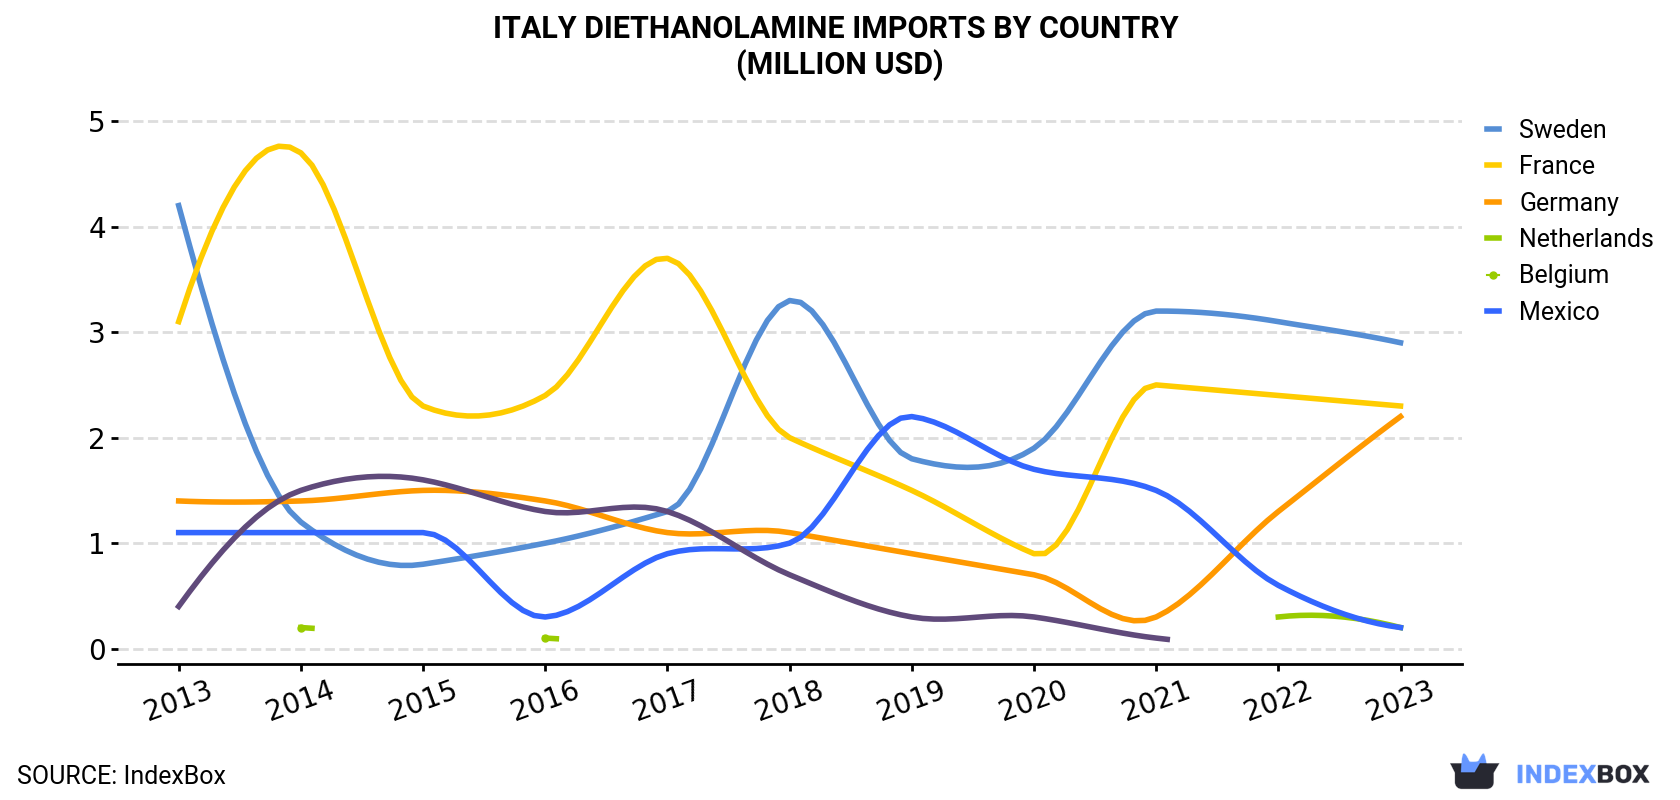 Italy Diethanolamine Imports By Country (Million USD)